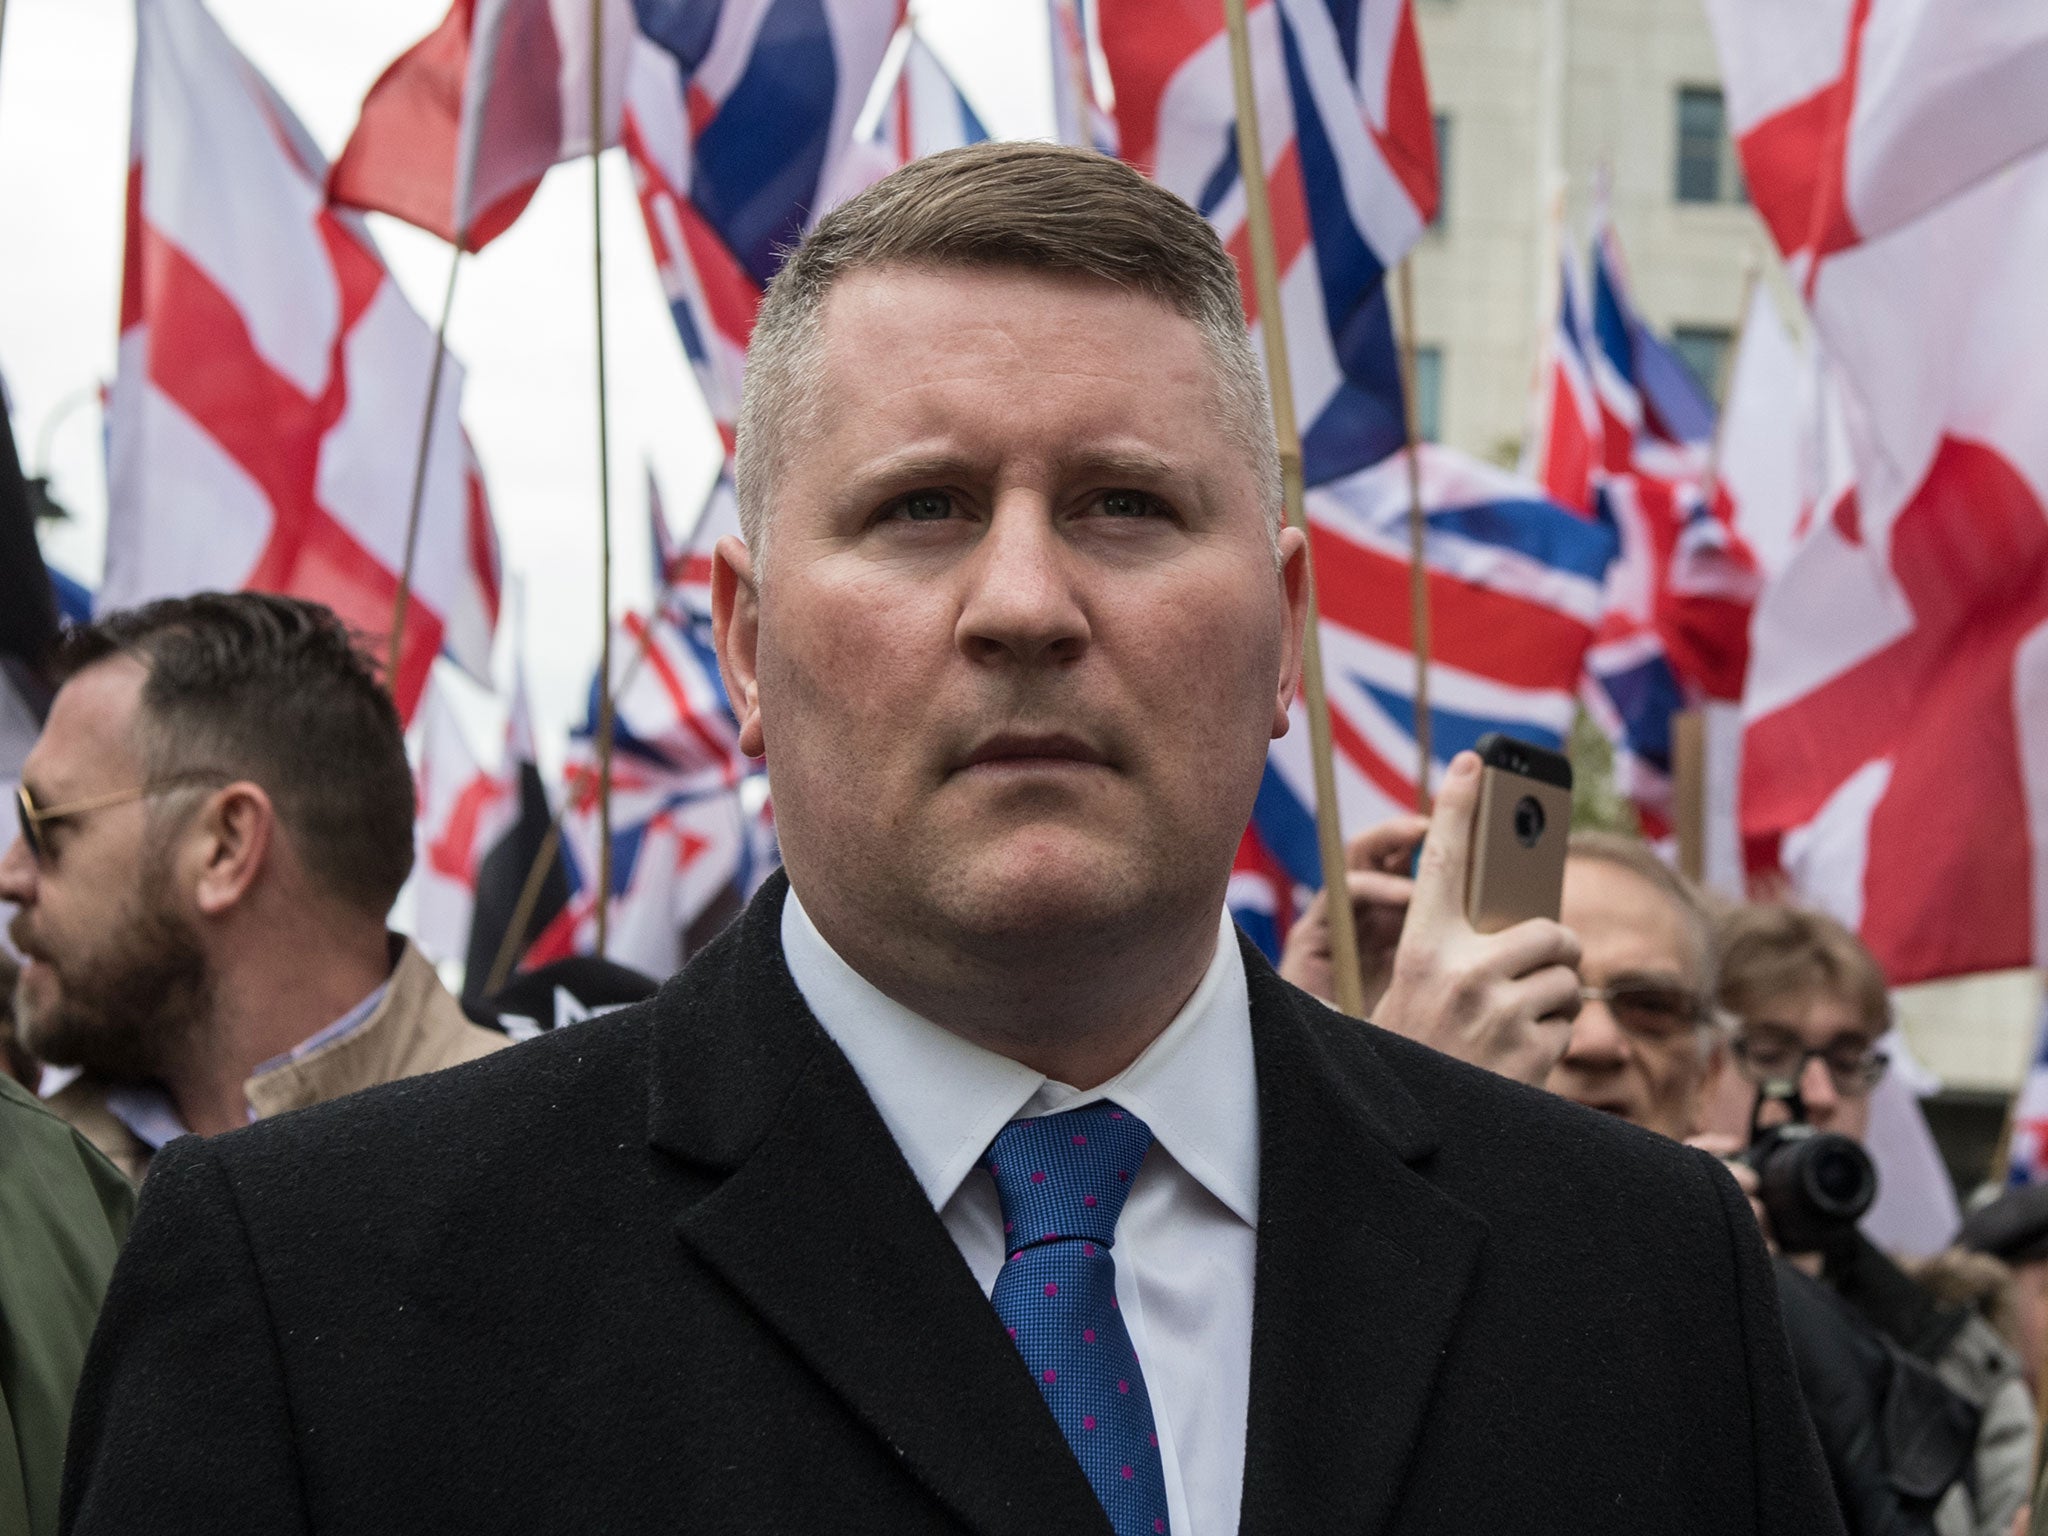 Britain First leader Paul Golding at a protest in response to the 2017 Westminster terror attack in London